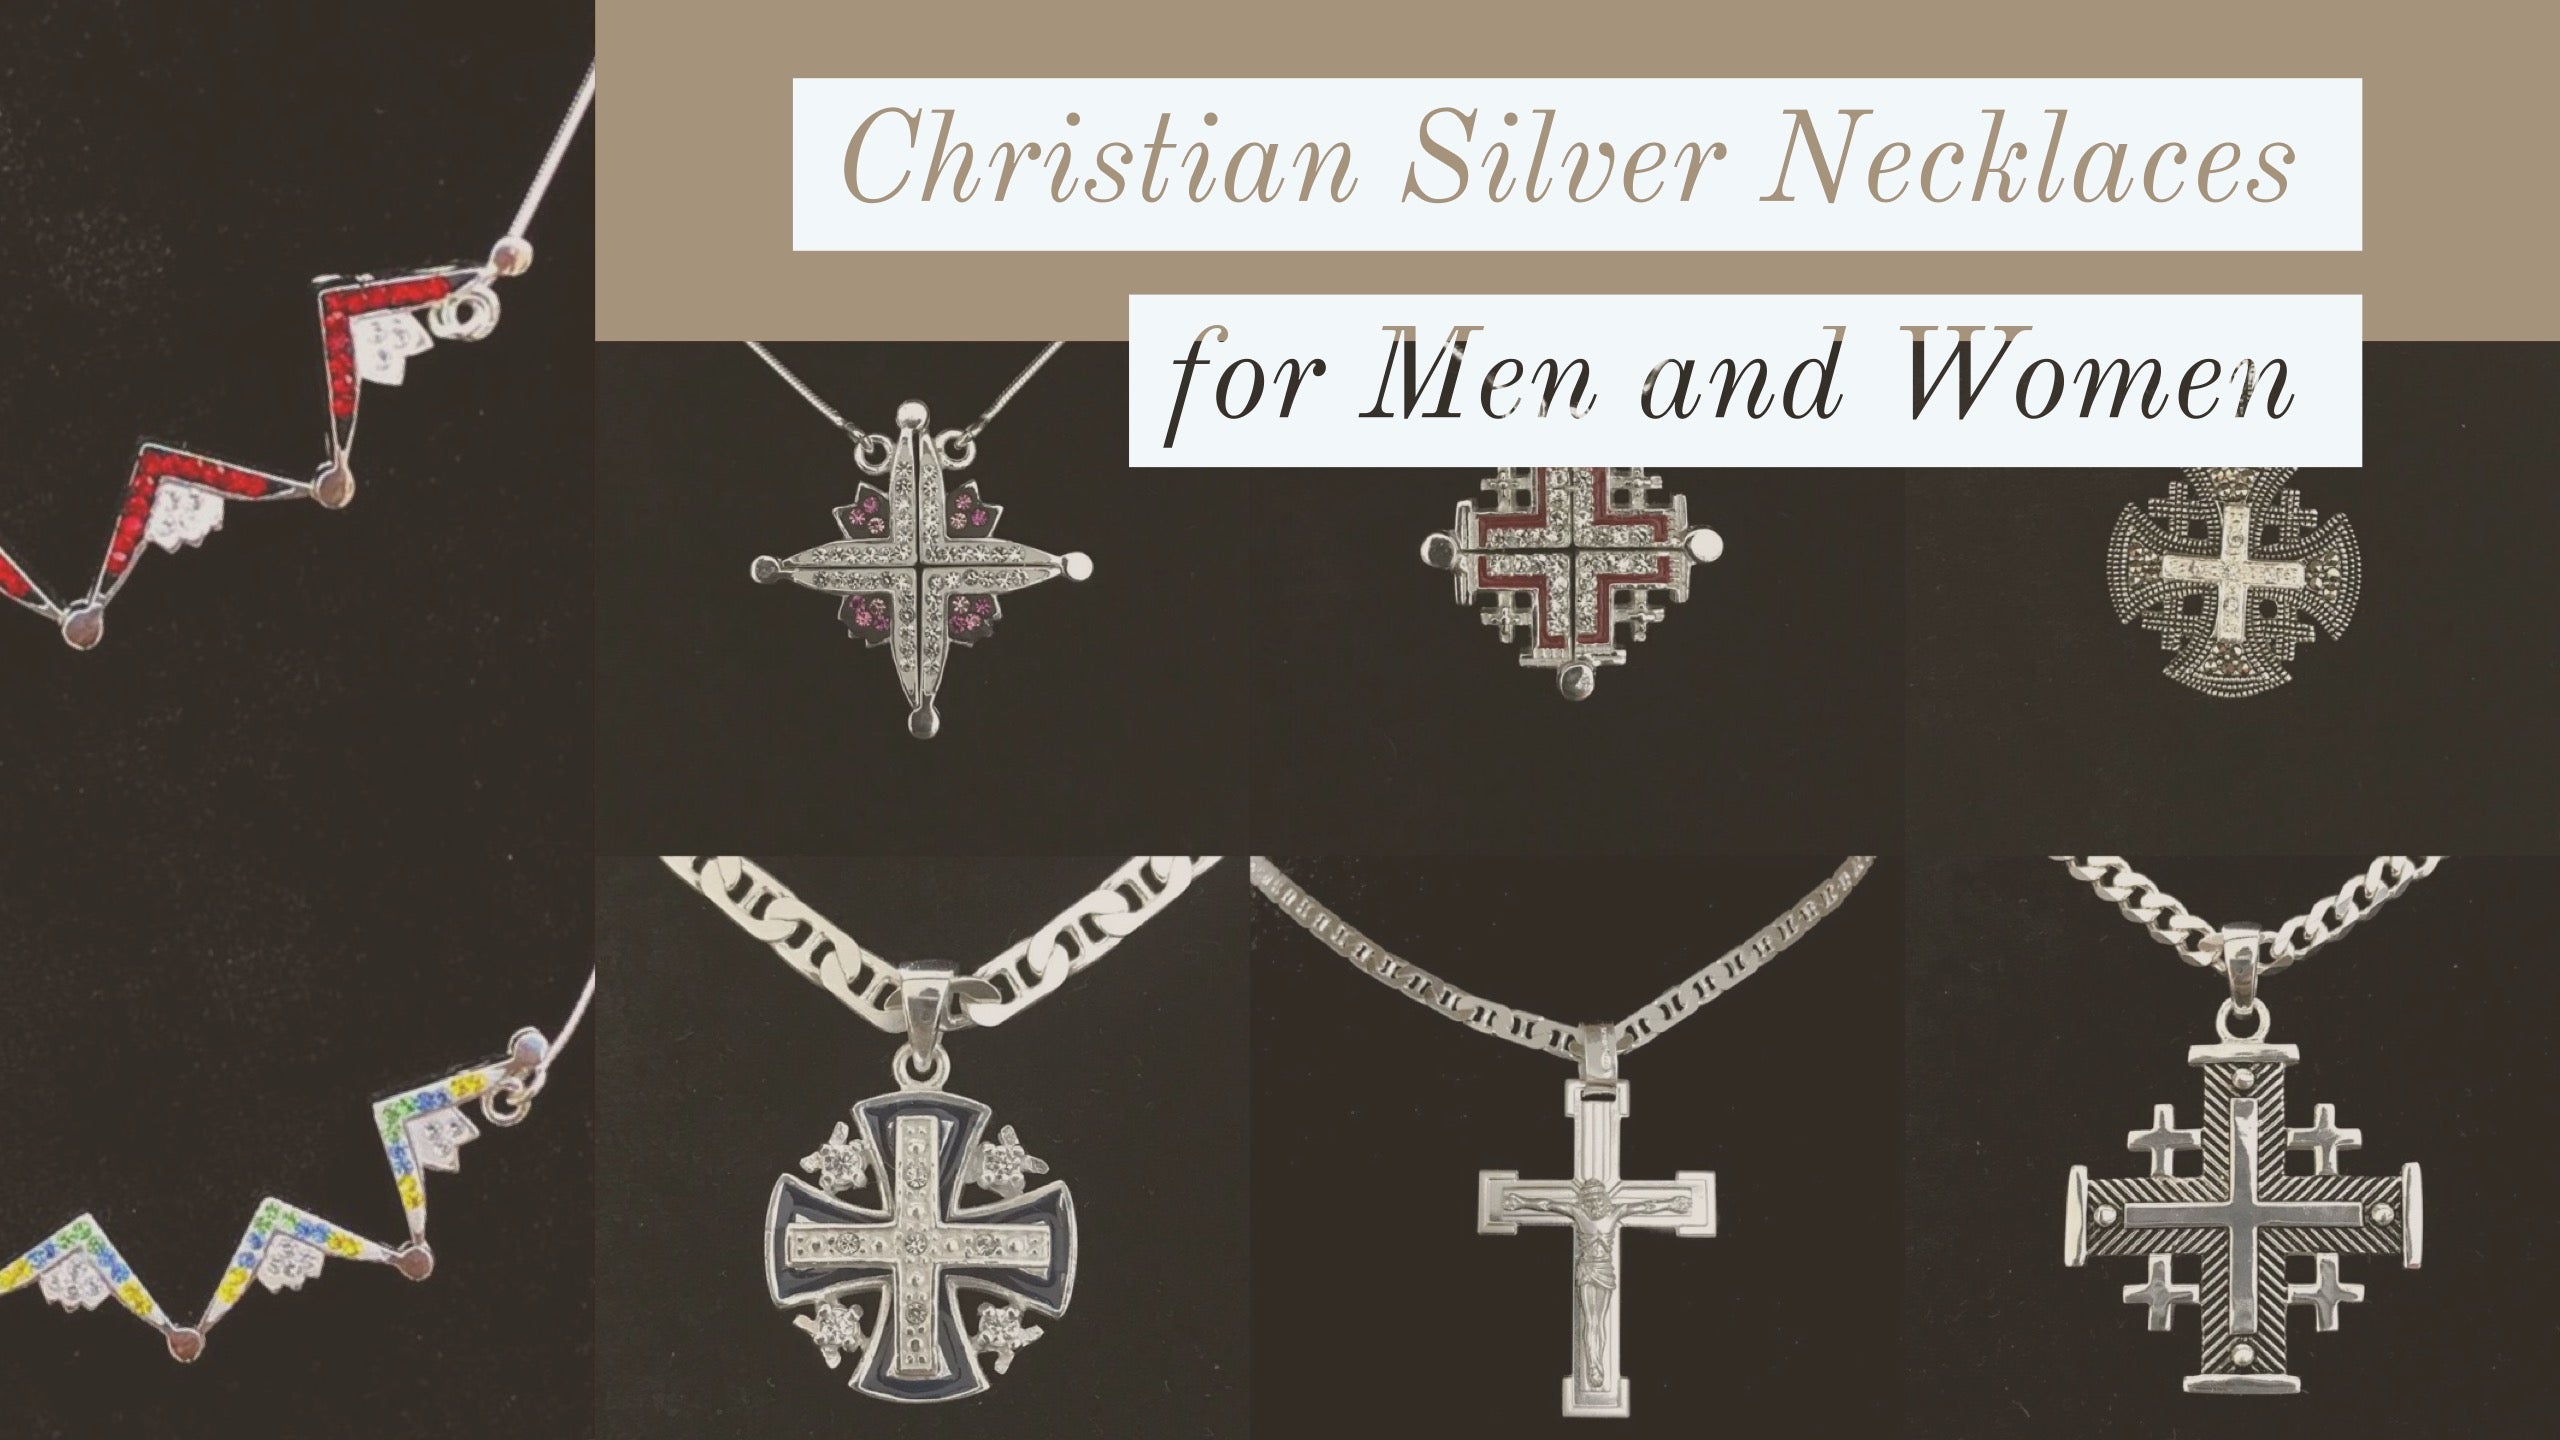 Christian Silver Necklaces for Men and Women